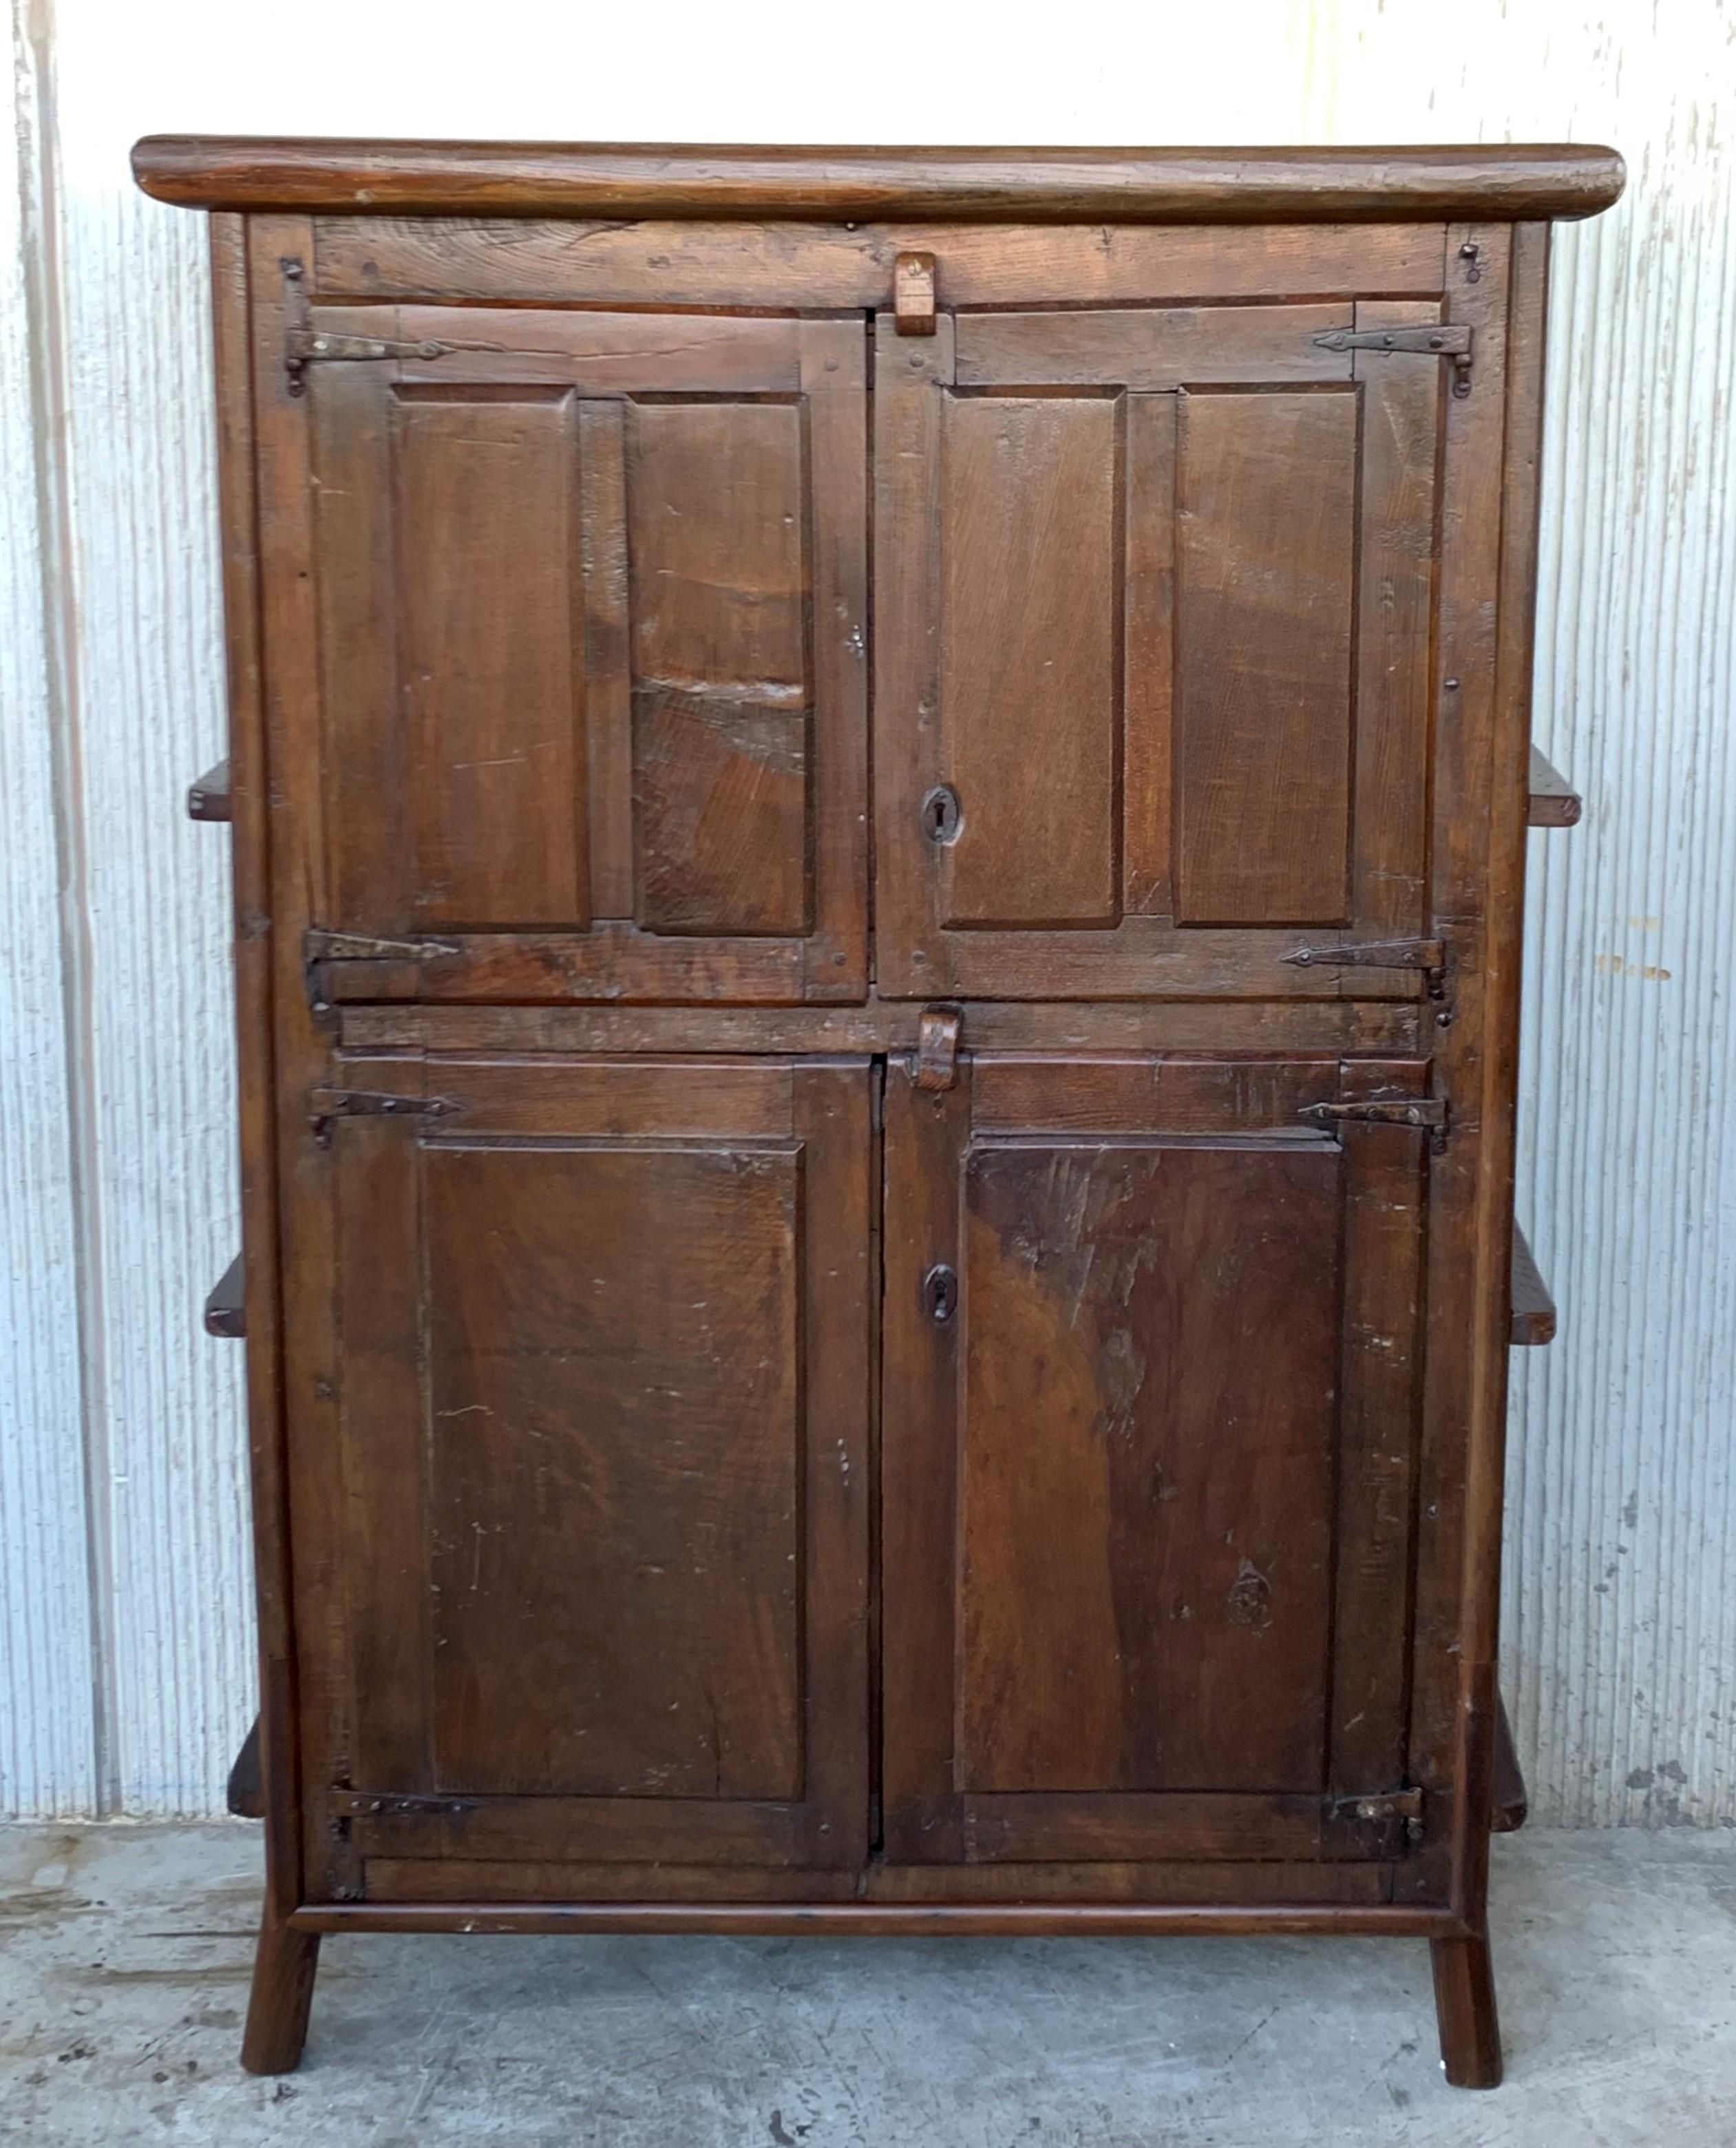 Grand 17th century Spanish armario or wardrobe armoire constructed from walnut. Features a coffered case fronted by four large doors. This massive cabinet made in Spain features beautiful walnut grain and showcases the amazing craftsmanship. There